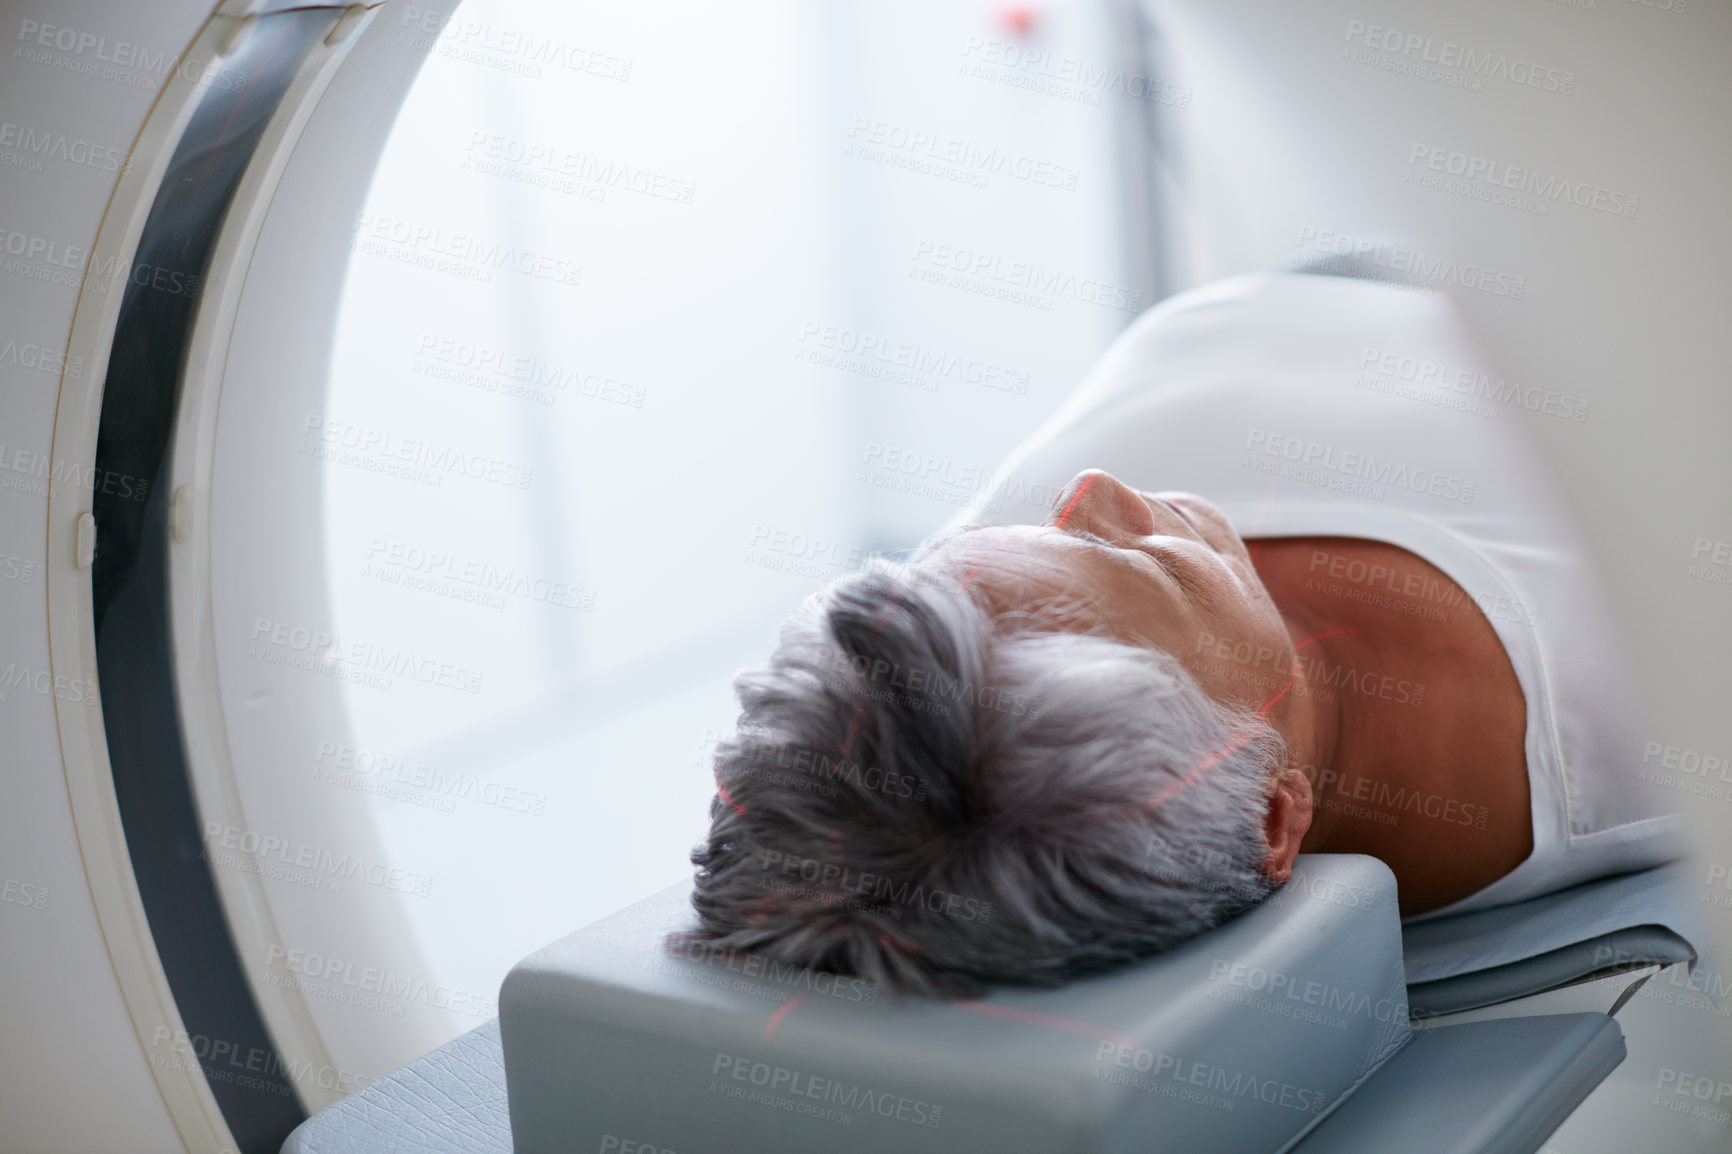 Buy stock photo Shot of a senior woman about to have an MRI scan